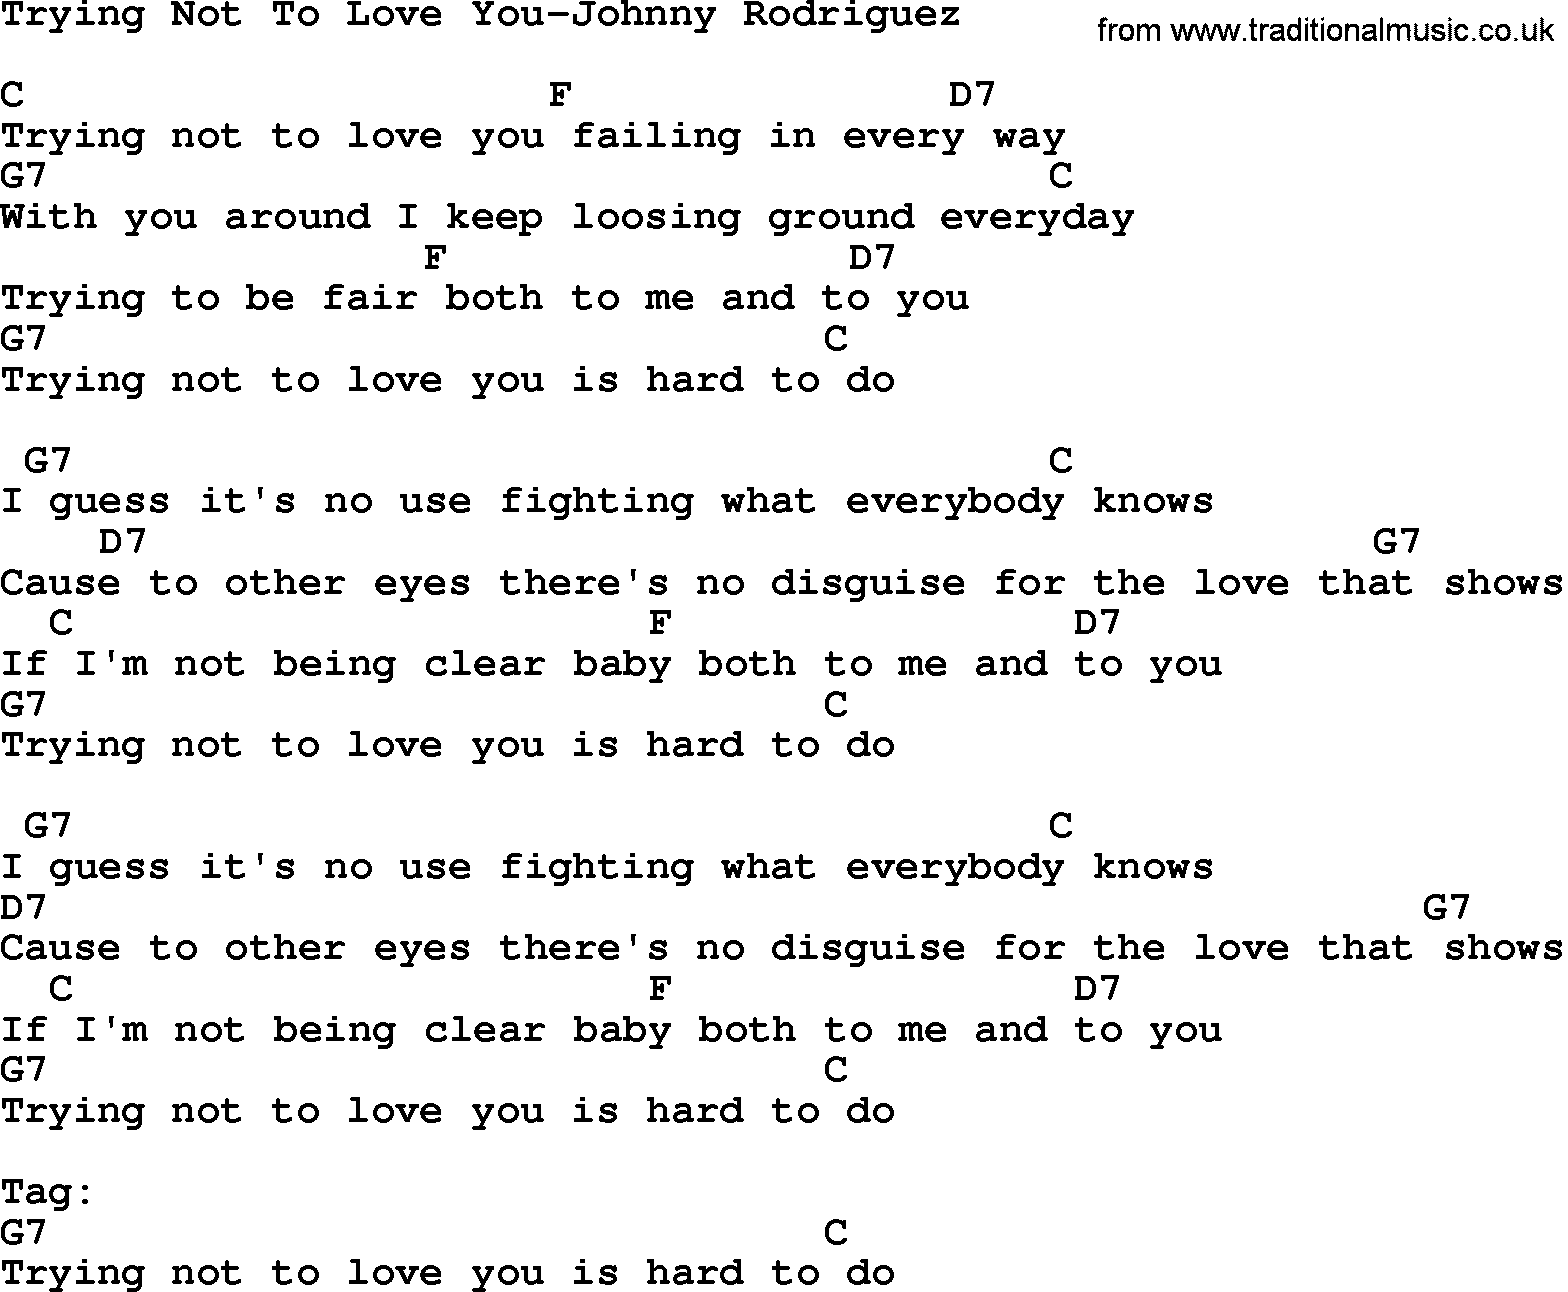 Country music song: Trying Not To Love You-Johnny Rodriguez lyrics and chords